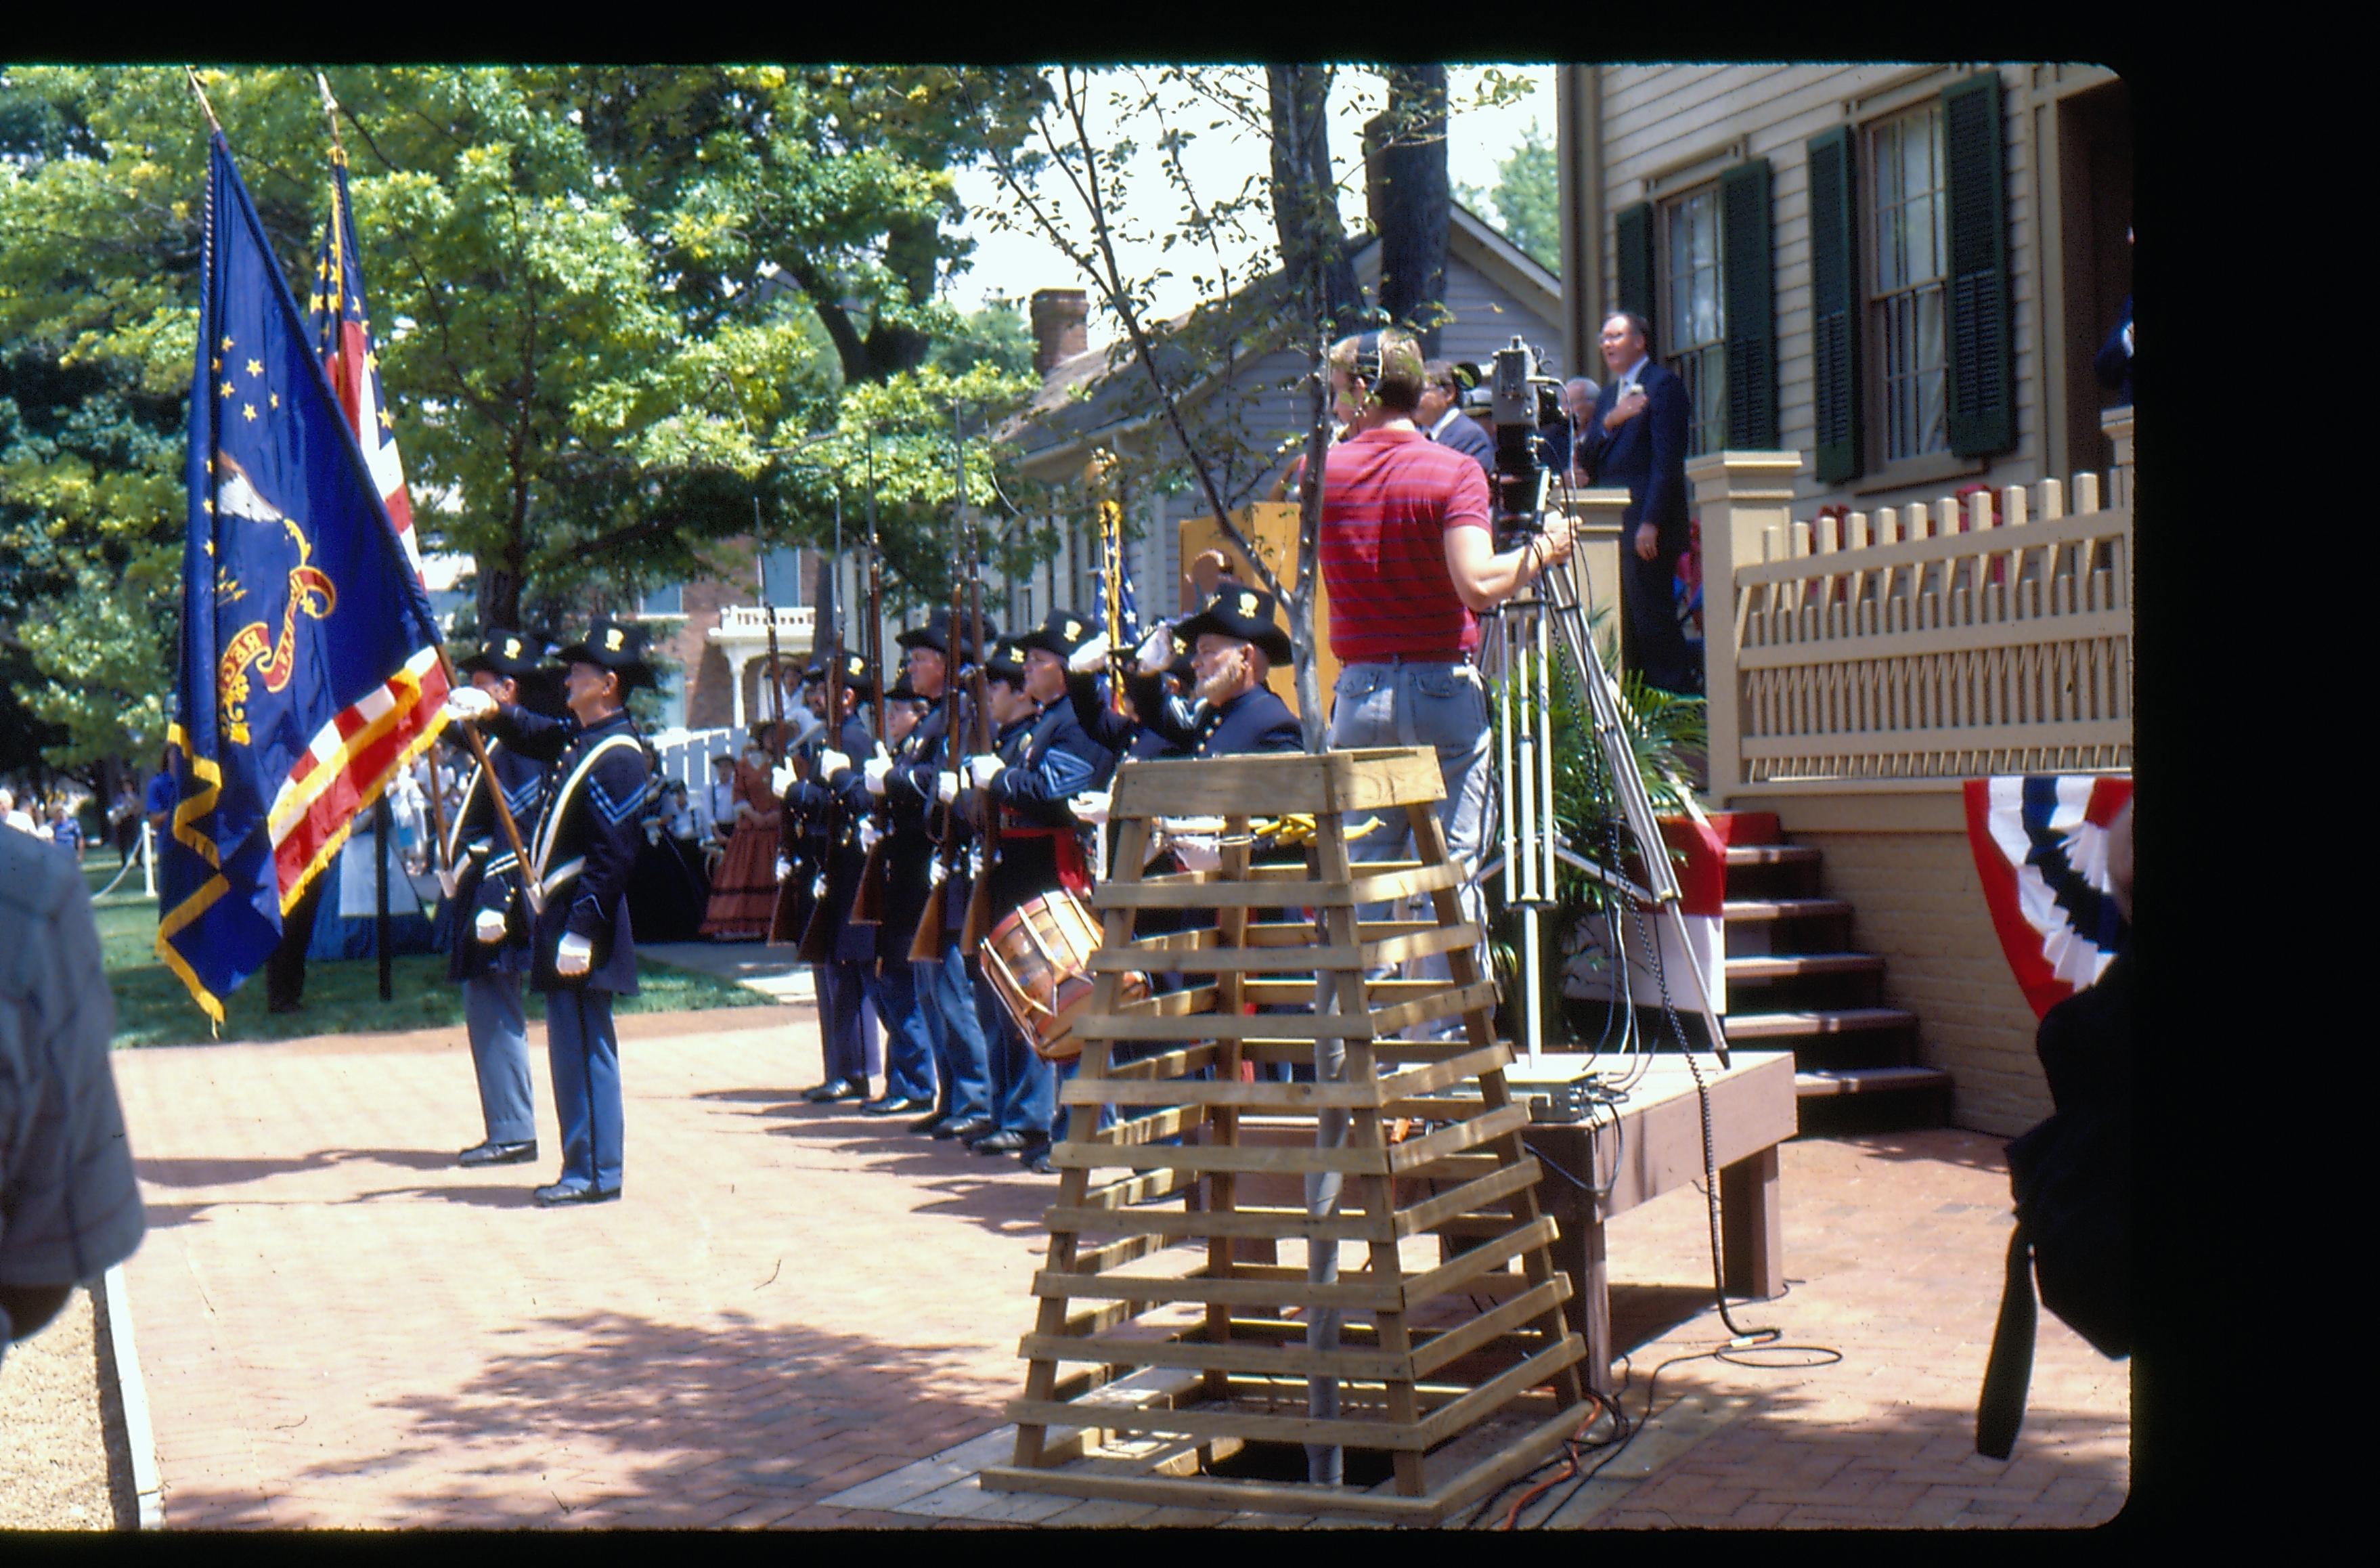 A Union Army reenactor group bearing US and regimental flags stand in formation in front of the Lincoln Home during reopening ceremony. A film crew can be seen recording the event in the middle foreground, along with a speakers podium. Dignitaries can be seen in the right background, standing in front of the restored Lincoln Home, at far right. The pre-move Corneau House can be seen in the background. Photographer facing north.